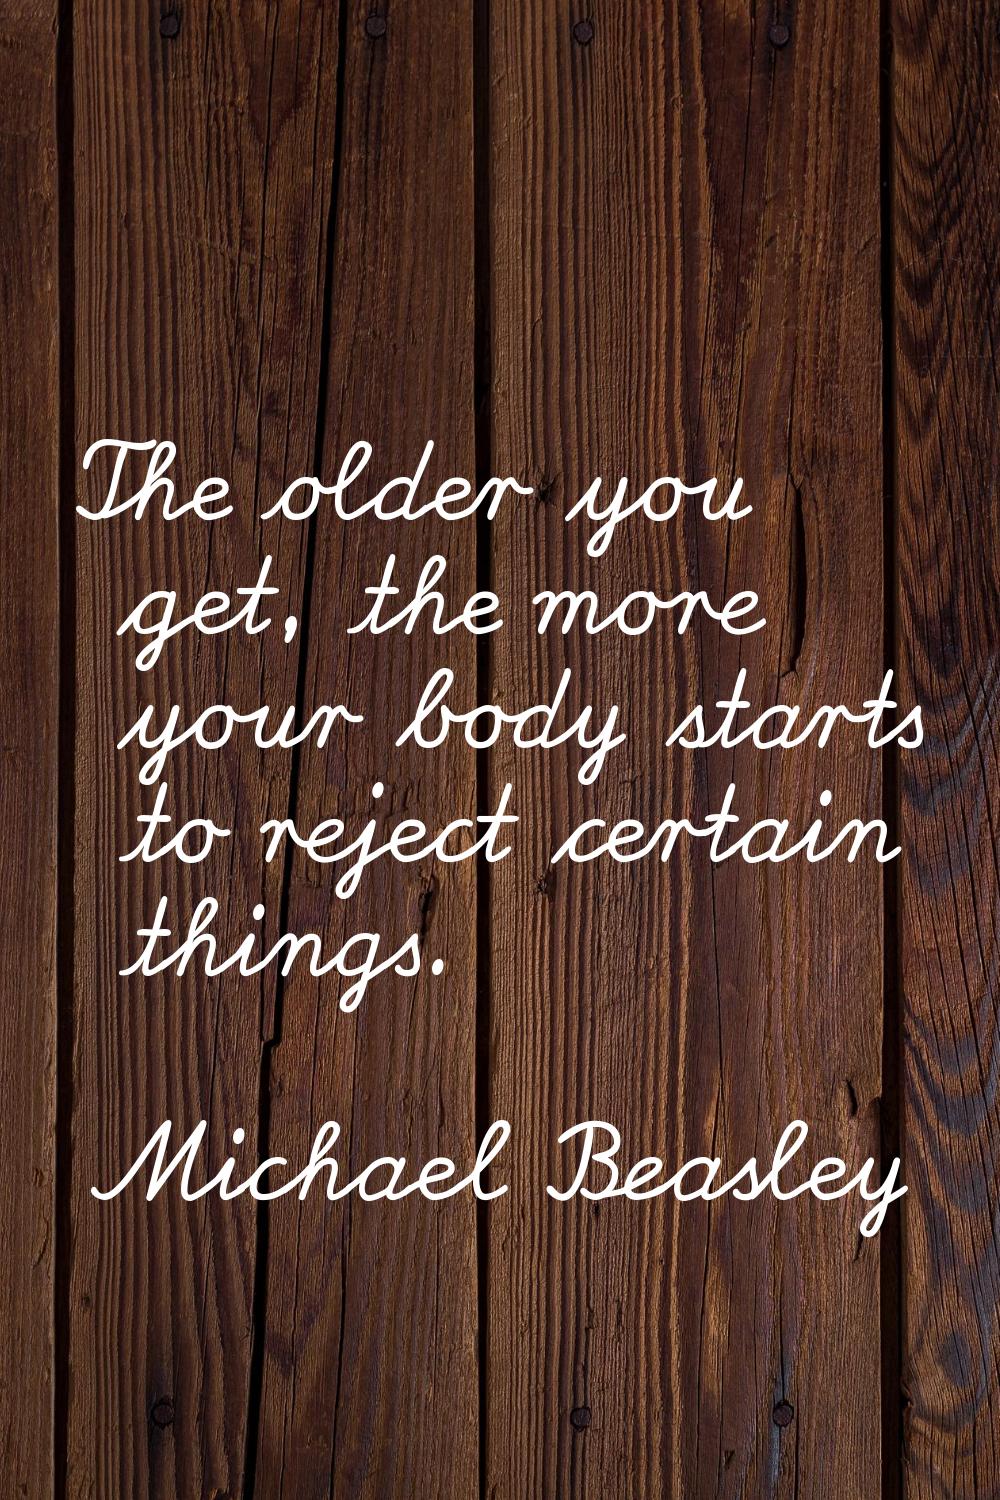 The older you get, the more your body starts to reject certain things.